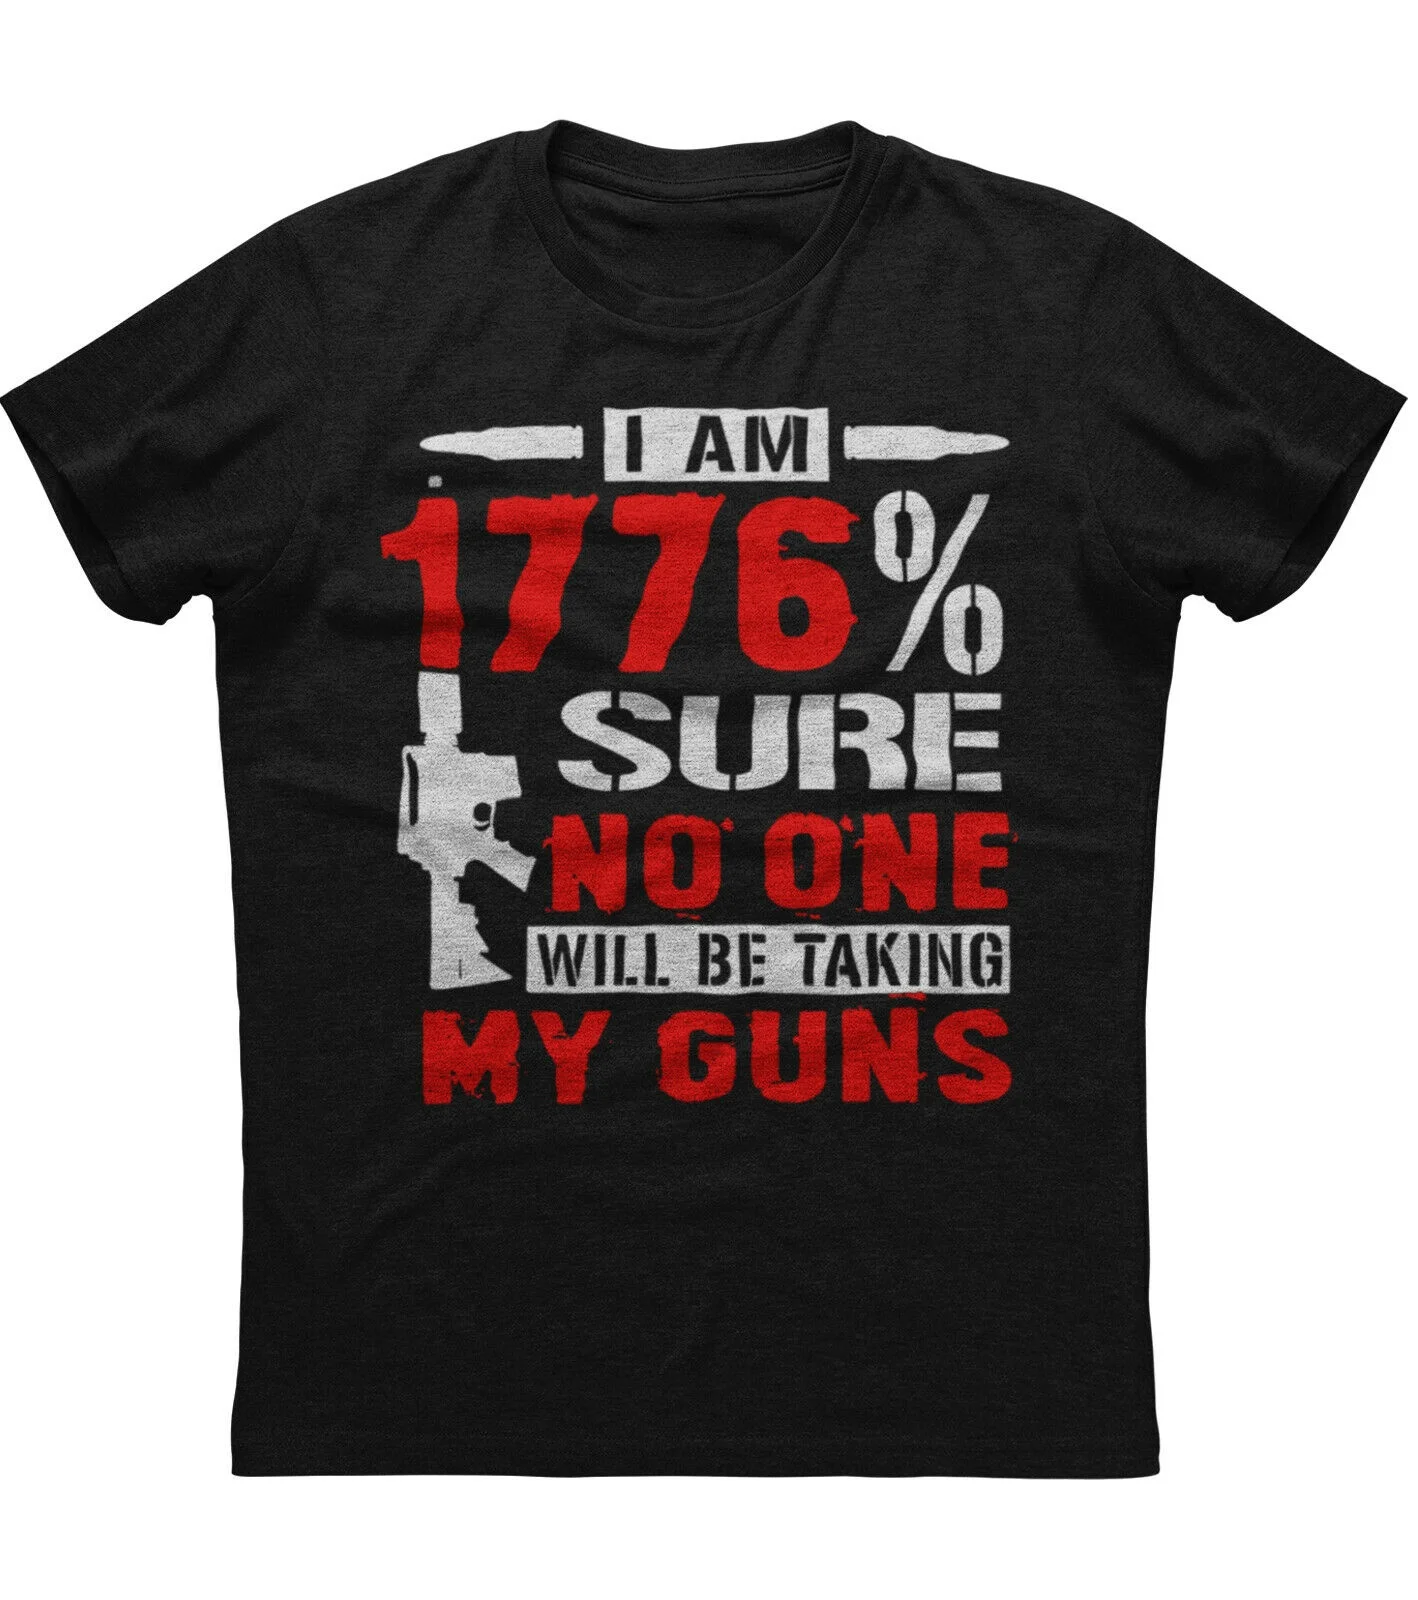 

1776% Sure No One Will Be Taking My Guns. Funny Gun Owner T-Shirt 100% Cotton O-Neck Short Sleeve Casual Mens T-shirt Size S-3XL